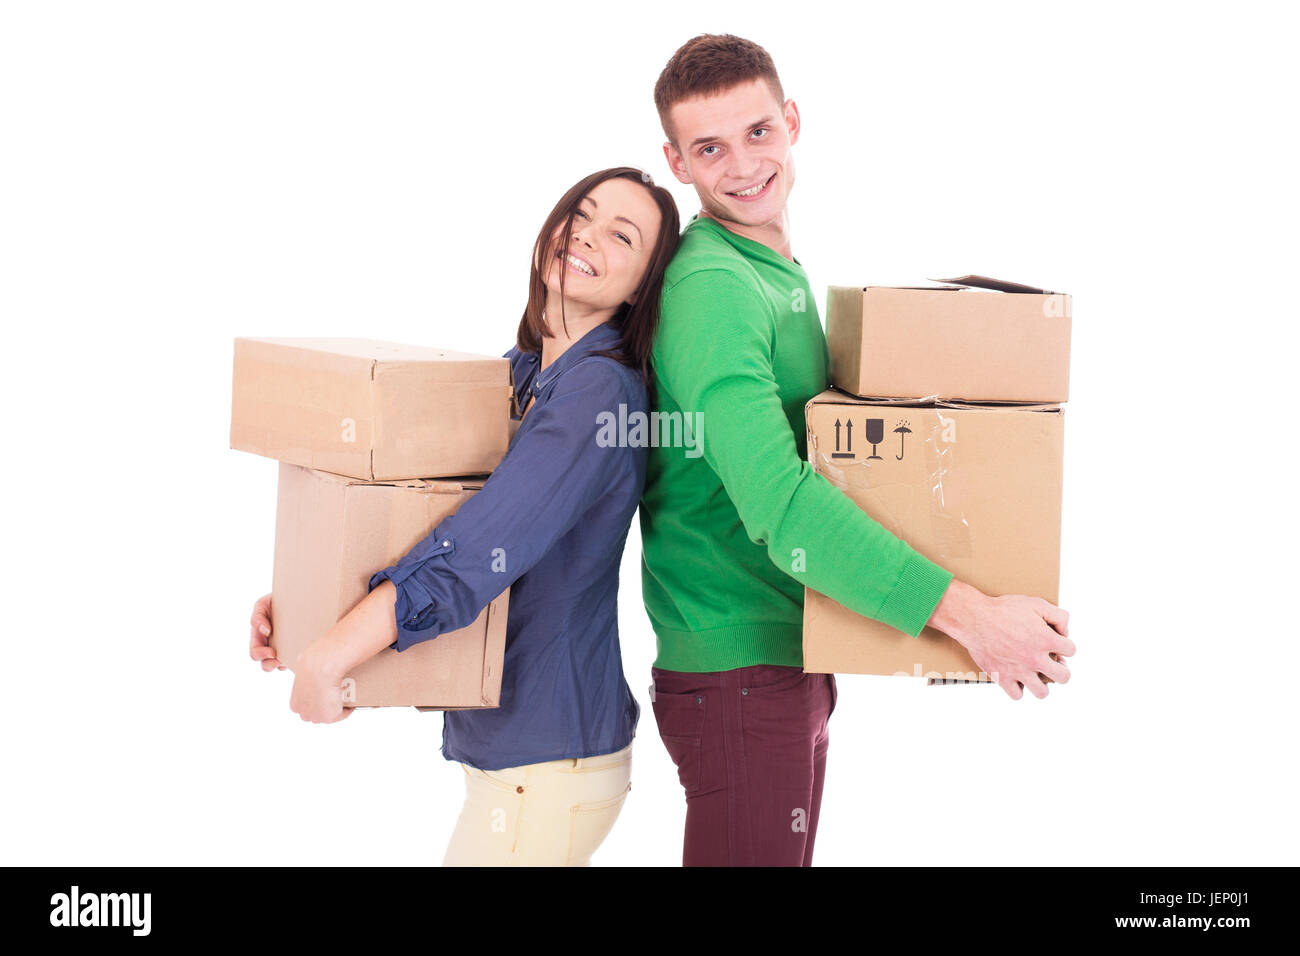 Happy smiling man and woman carrying boxes isolé sur fond blanc. Couple a ordre d'achats Banque D'Images